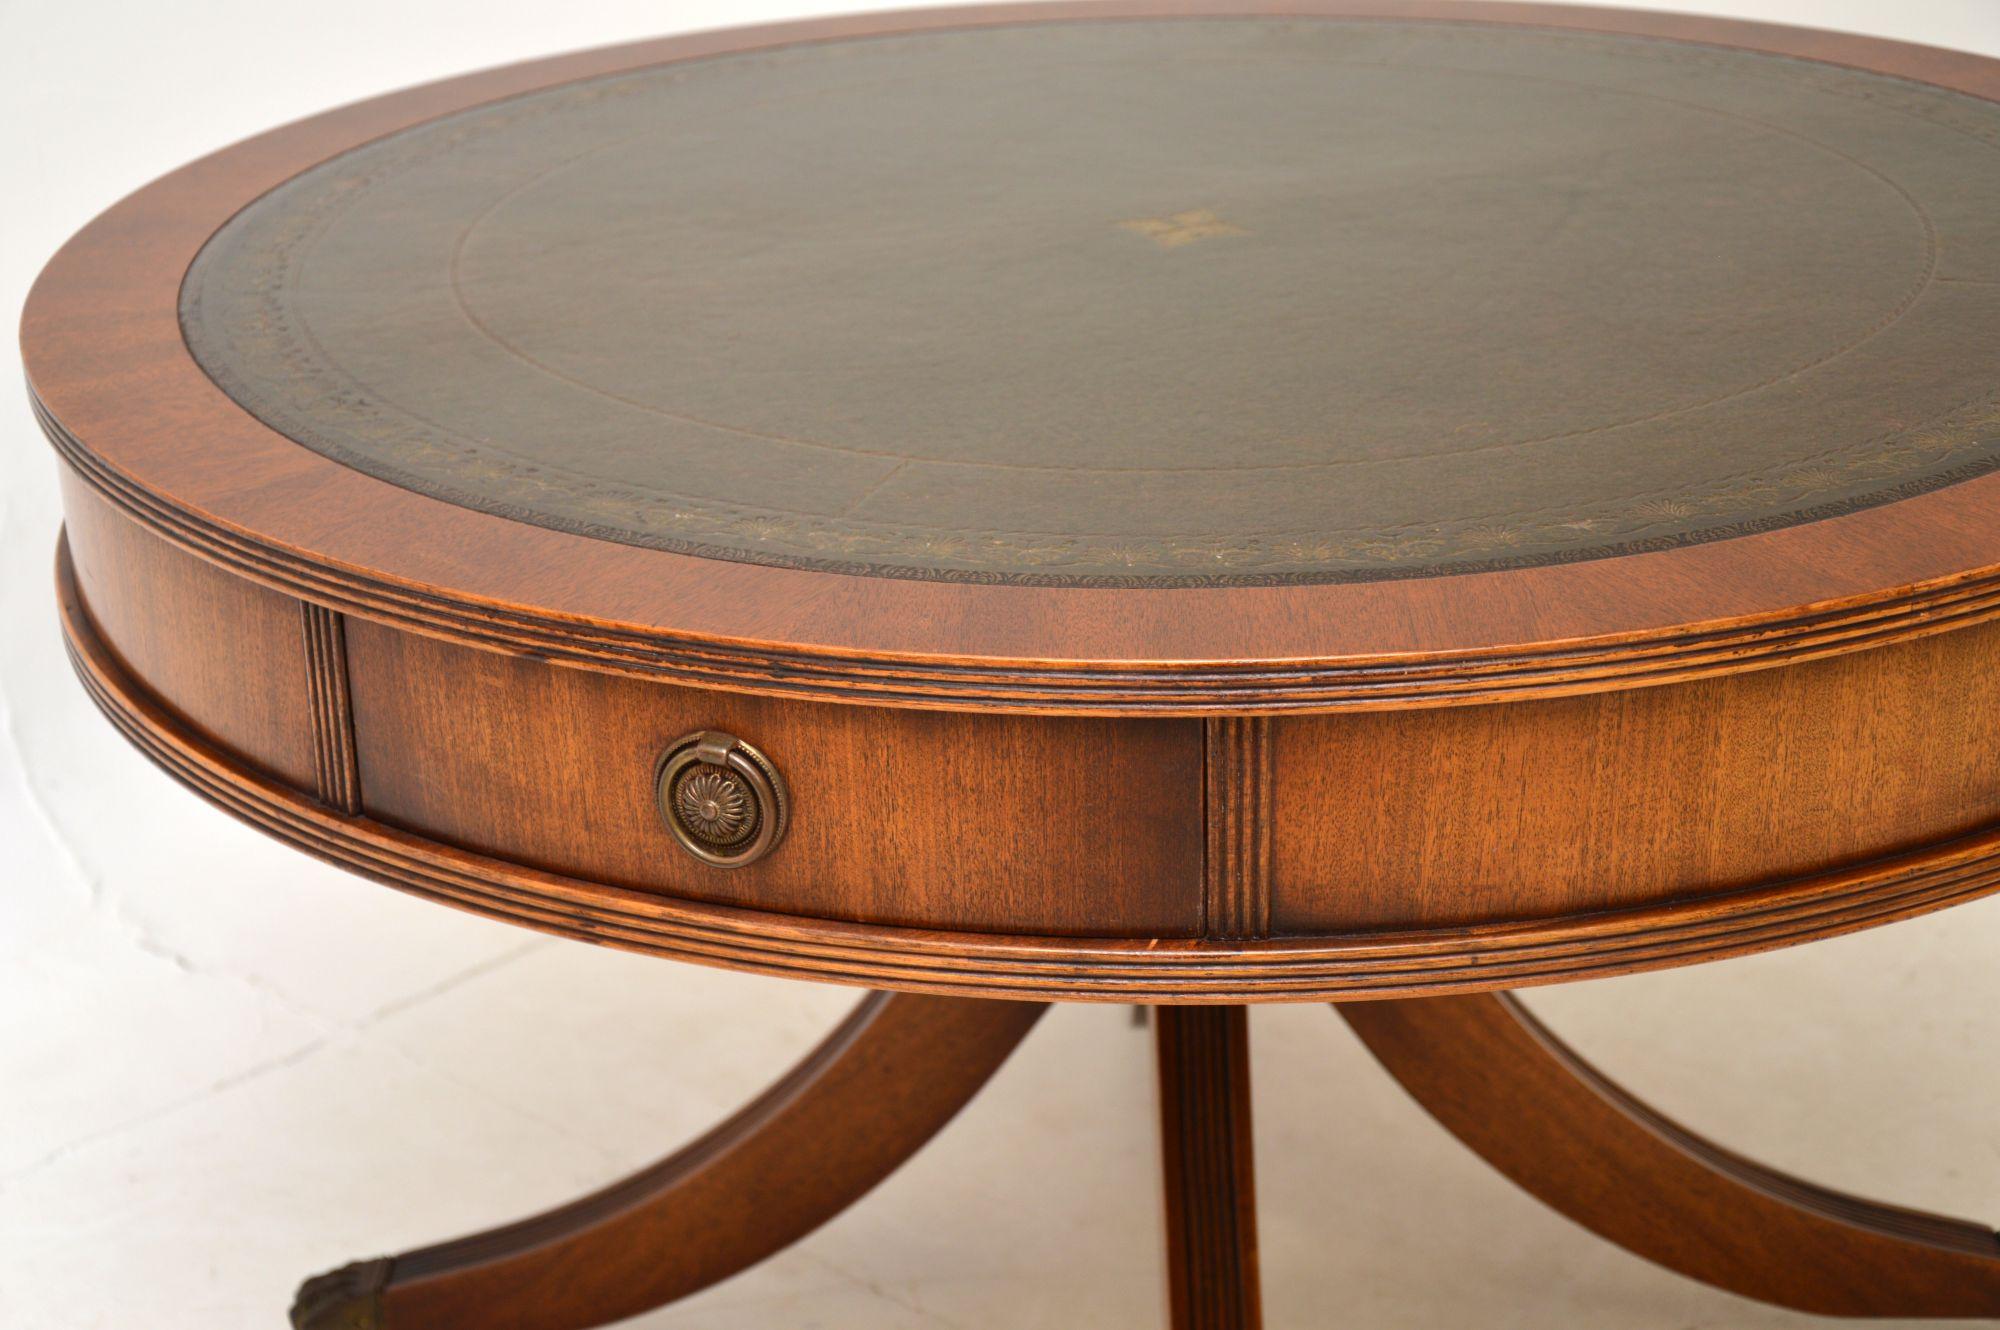 Mid-20th Century Antique Regency Style Leather Top Coffee Table